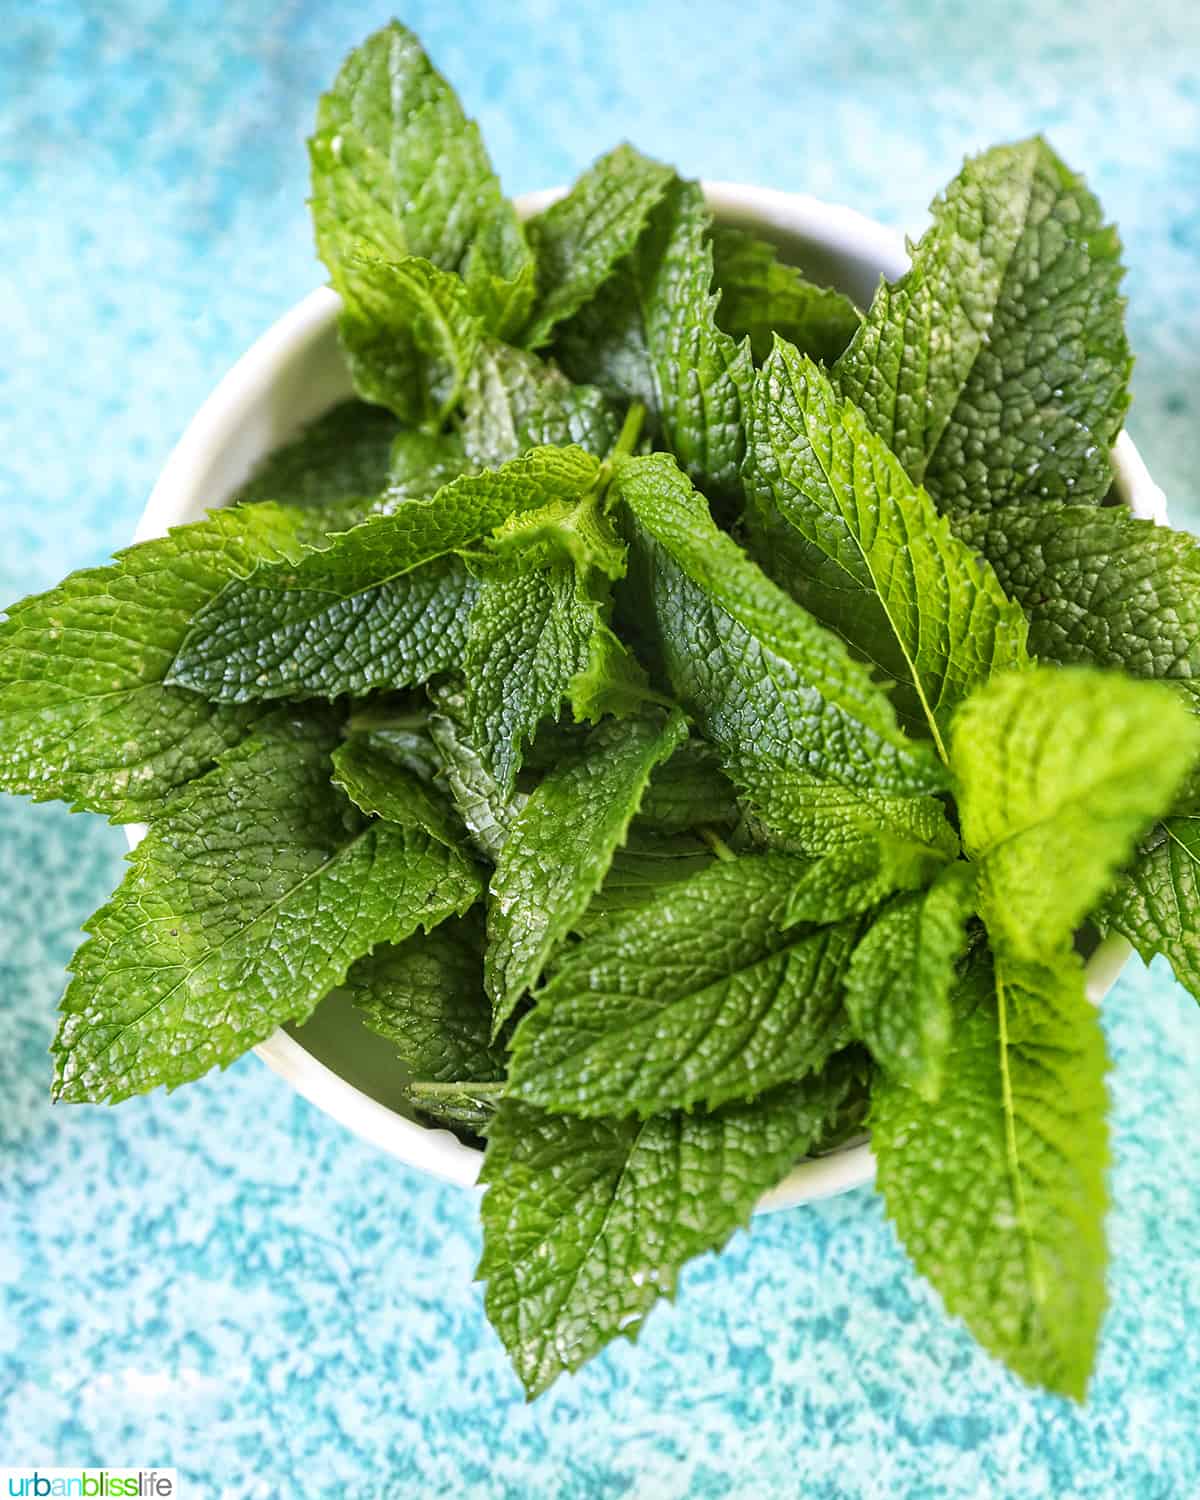 bunch of mint leaves in a white bowl on a bright blue background.